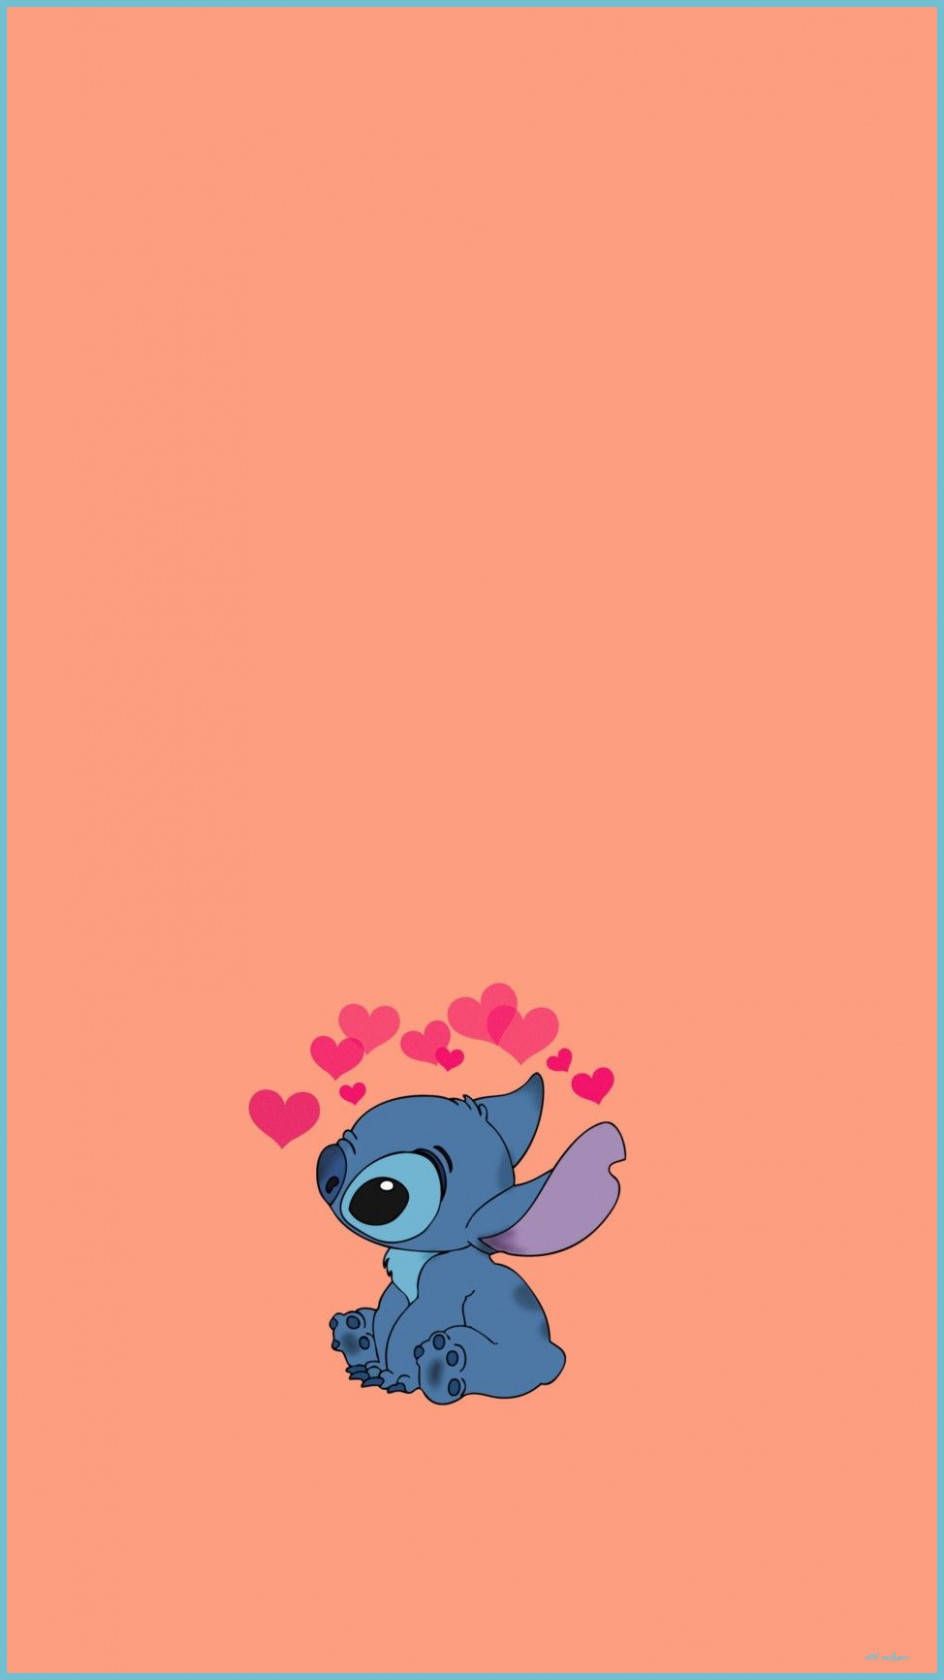 Stitch wallpaper for your phone - Stitch